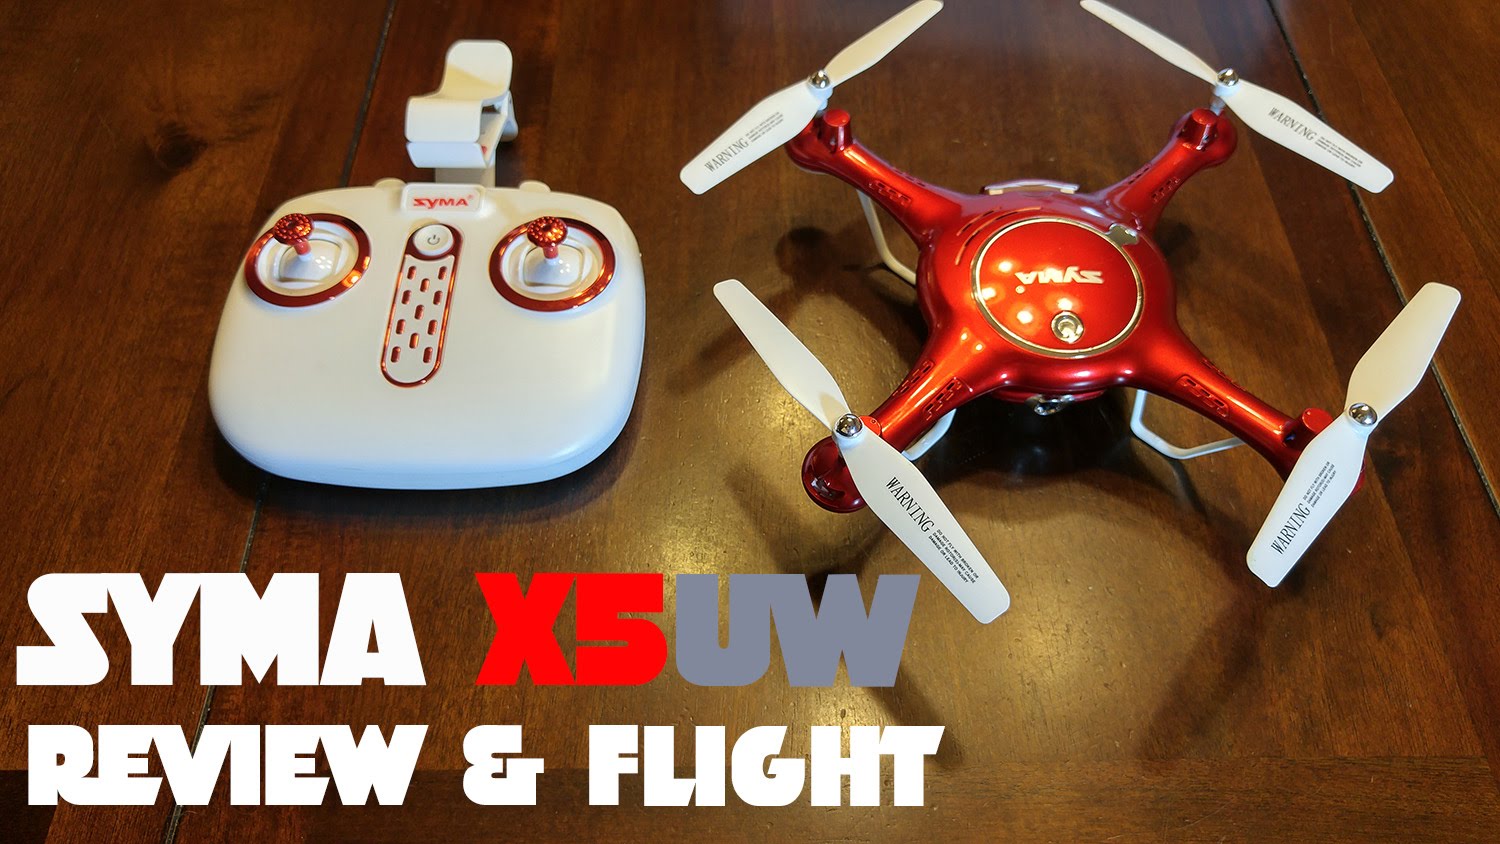 Syma’s NEWEST X5UW FPV 720HD Altitude Hold Quadcopter Review Flight